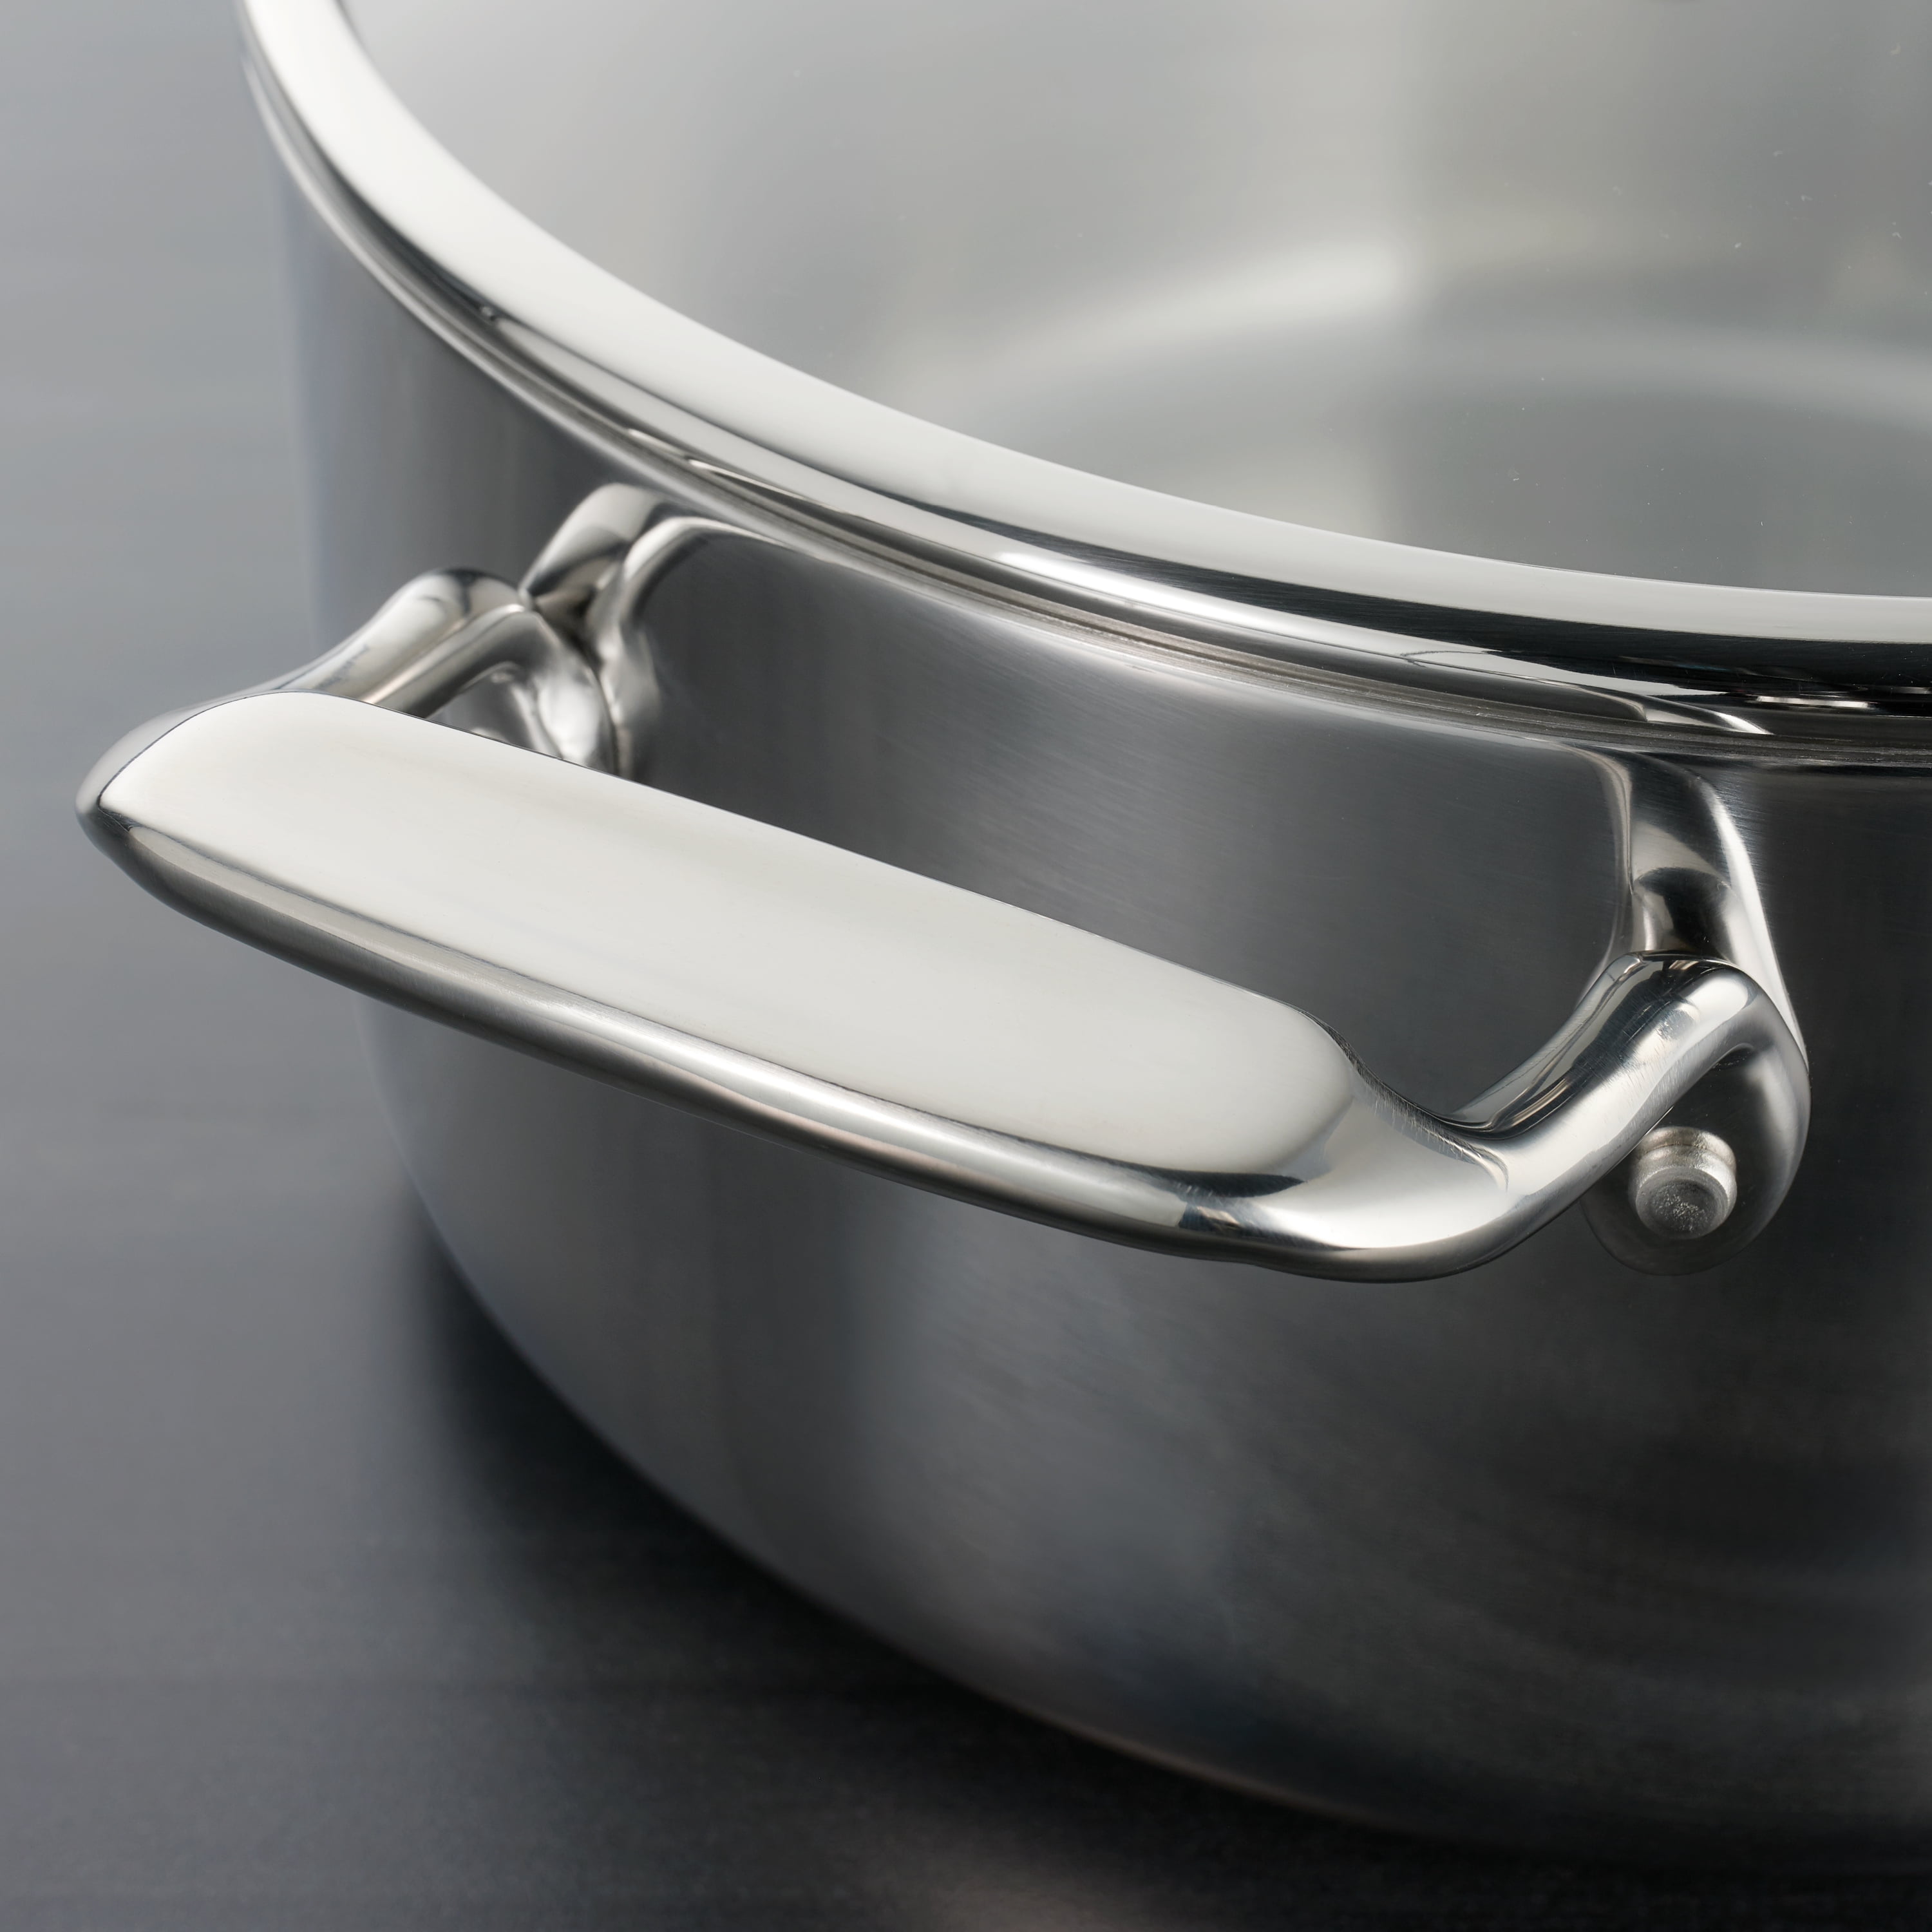 Tramontina Gourmet 4 Qt. Tri-Ply Clad Saucepan with Lid 80116/024DS - The  Home Depot